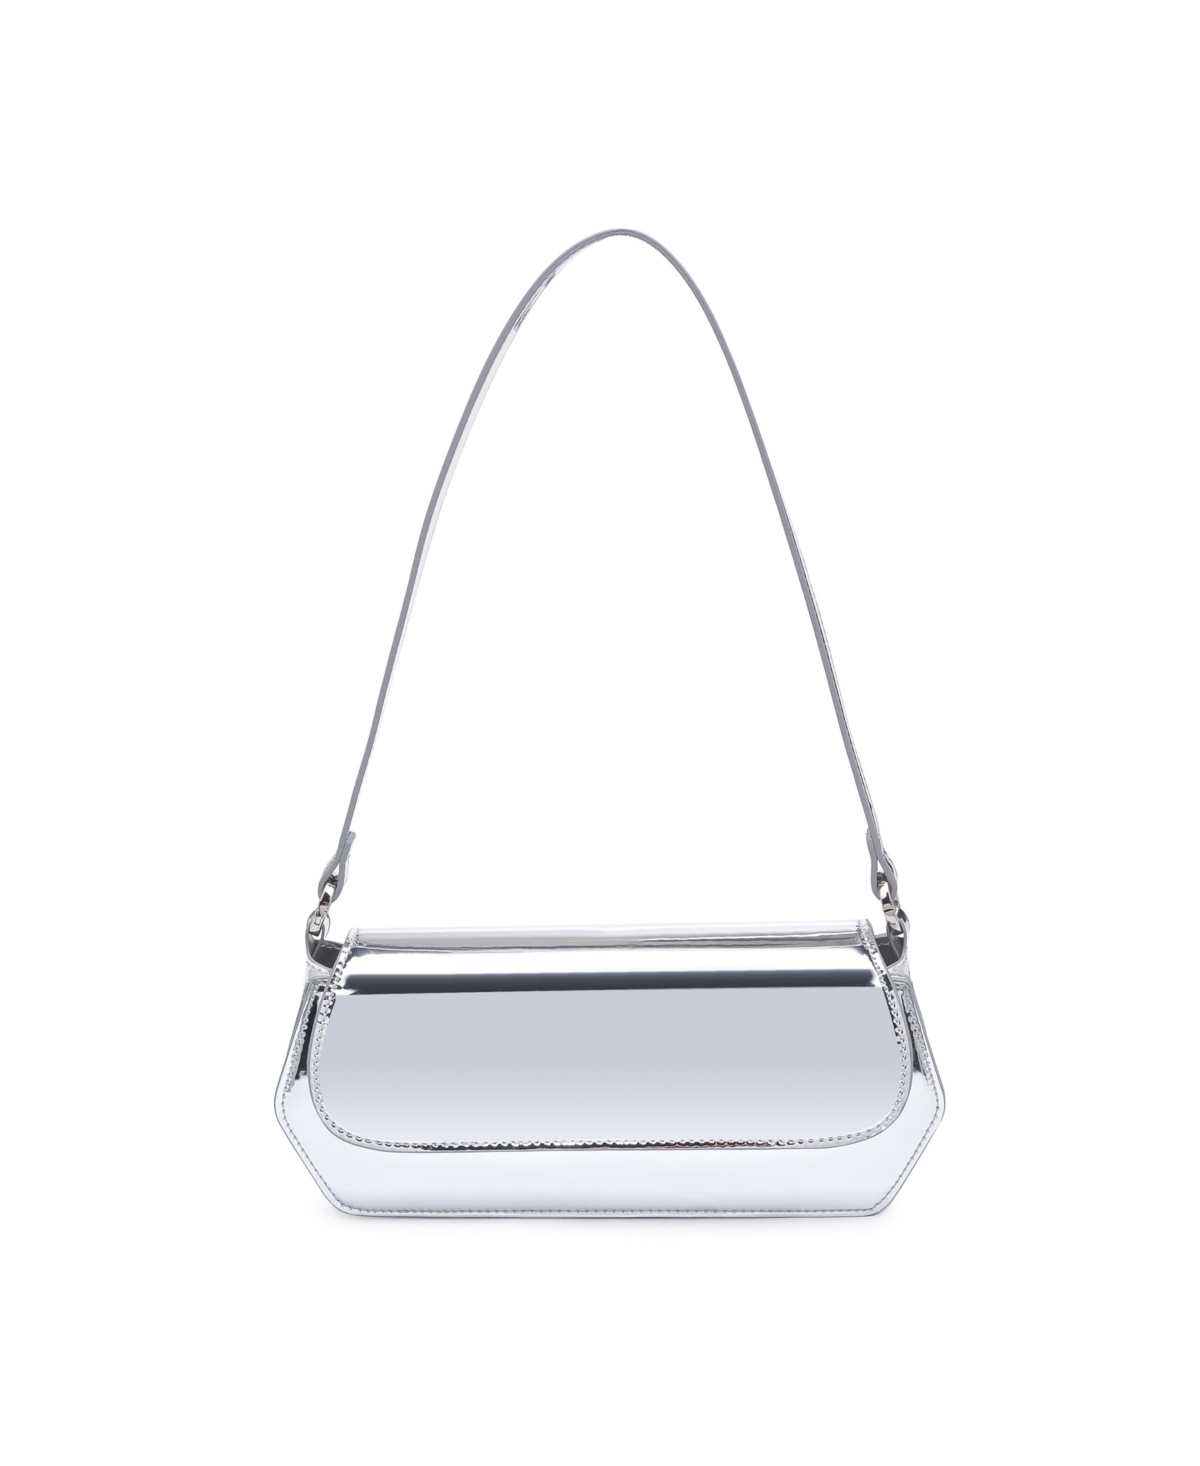 Urban Expressions Judith Iridescent Shoulder Bag In Silver